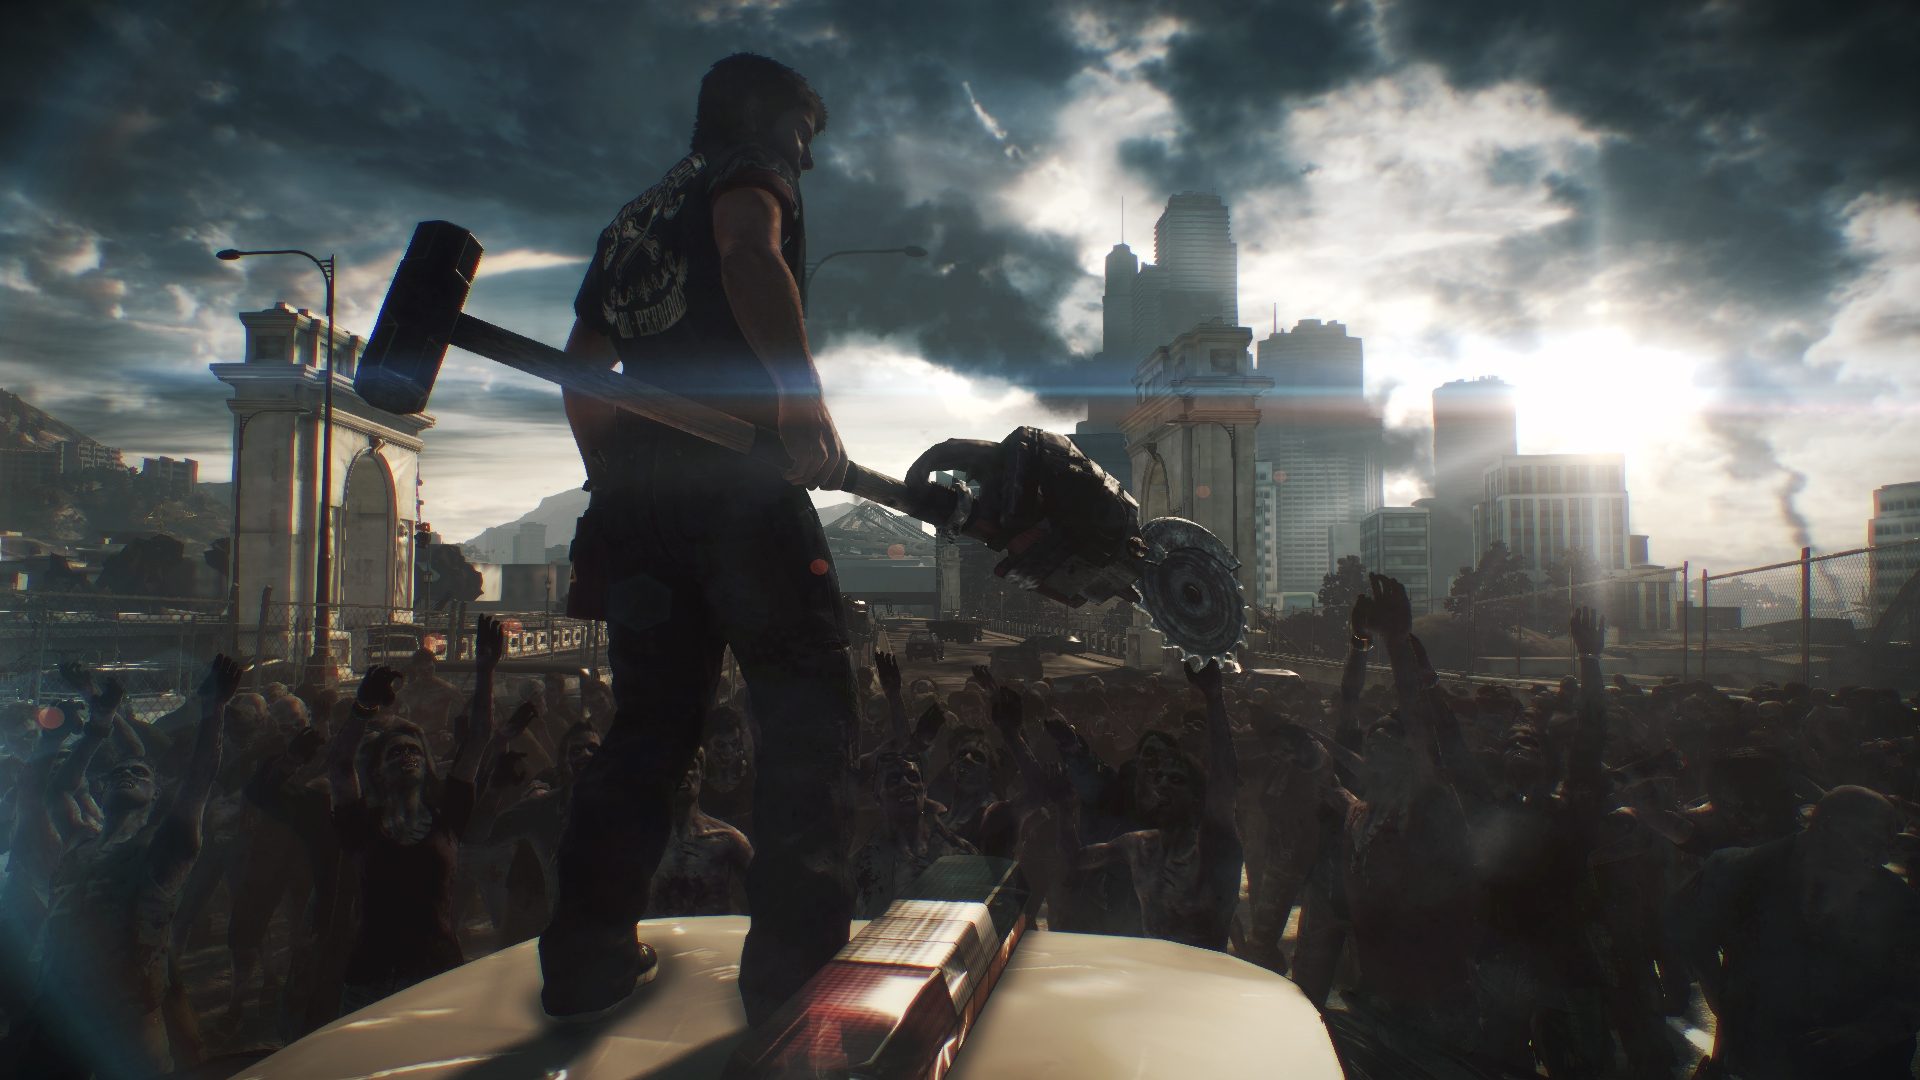 Dead Rising 3 coming to PC Sept. 5 - mxdwn Games